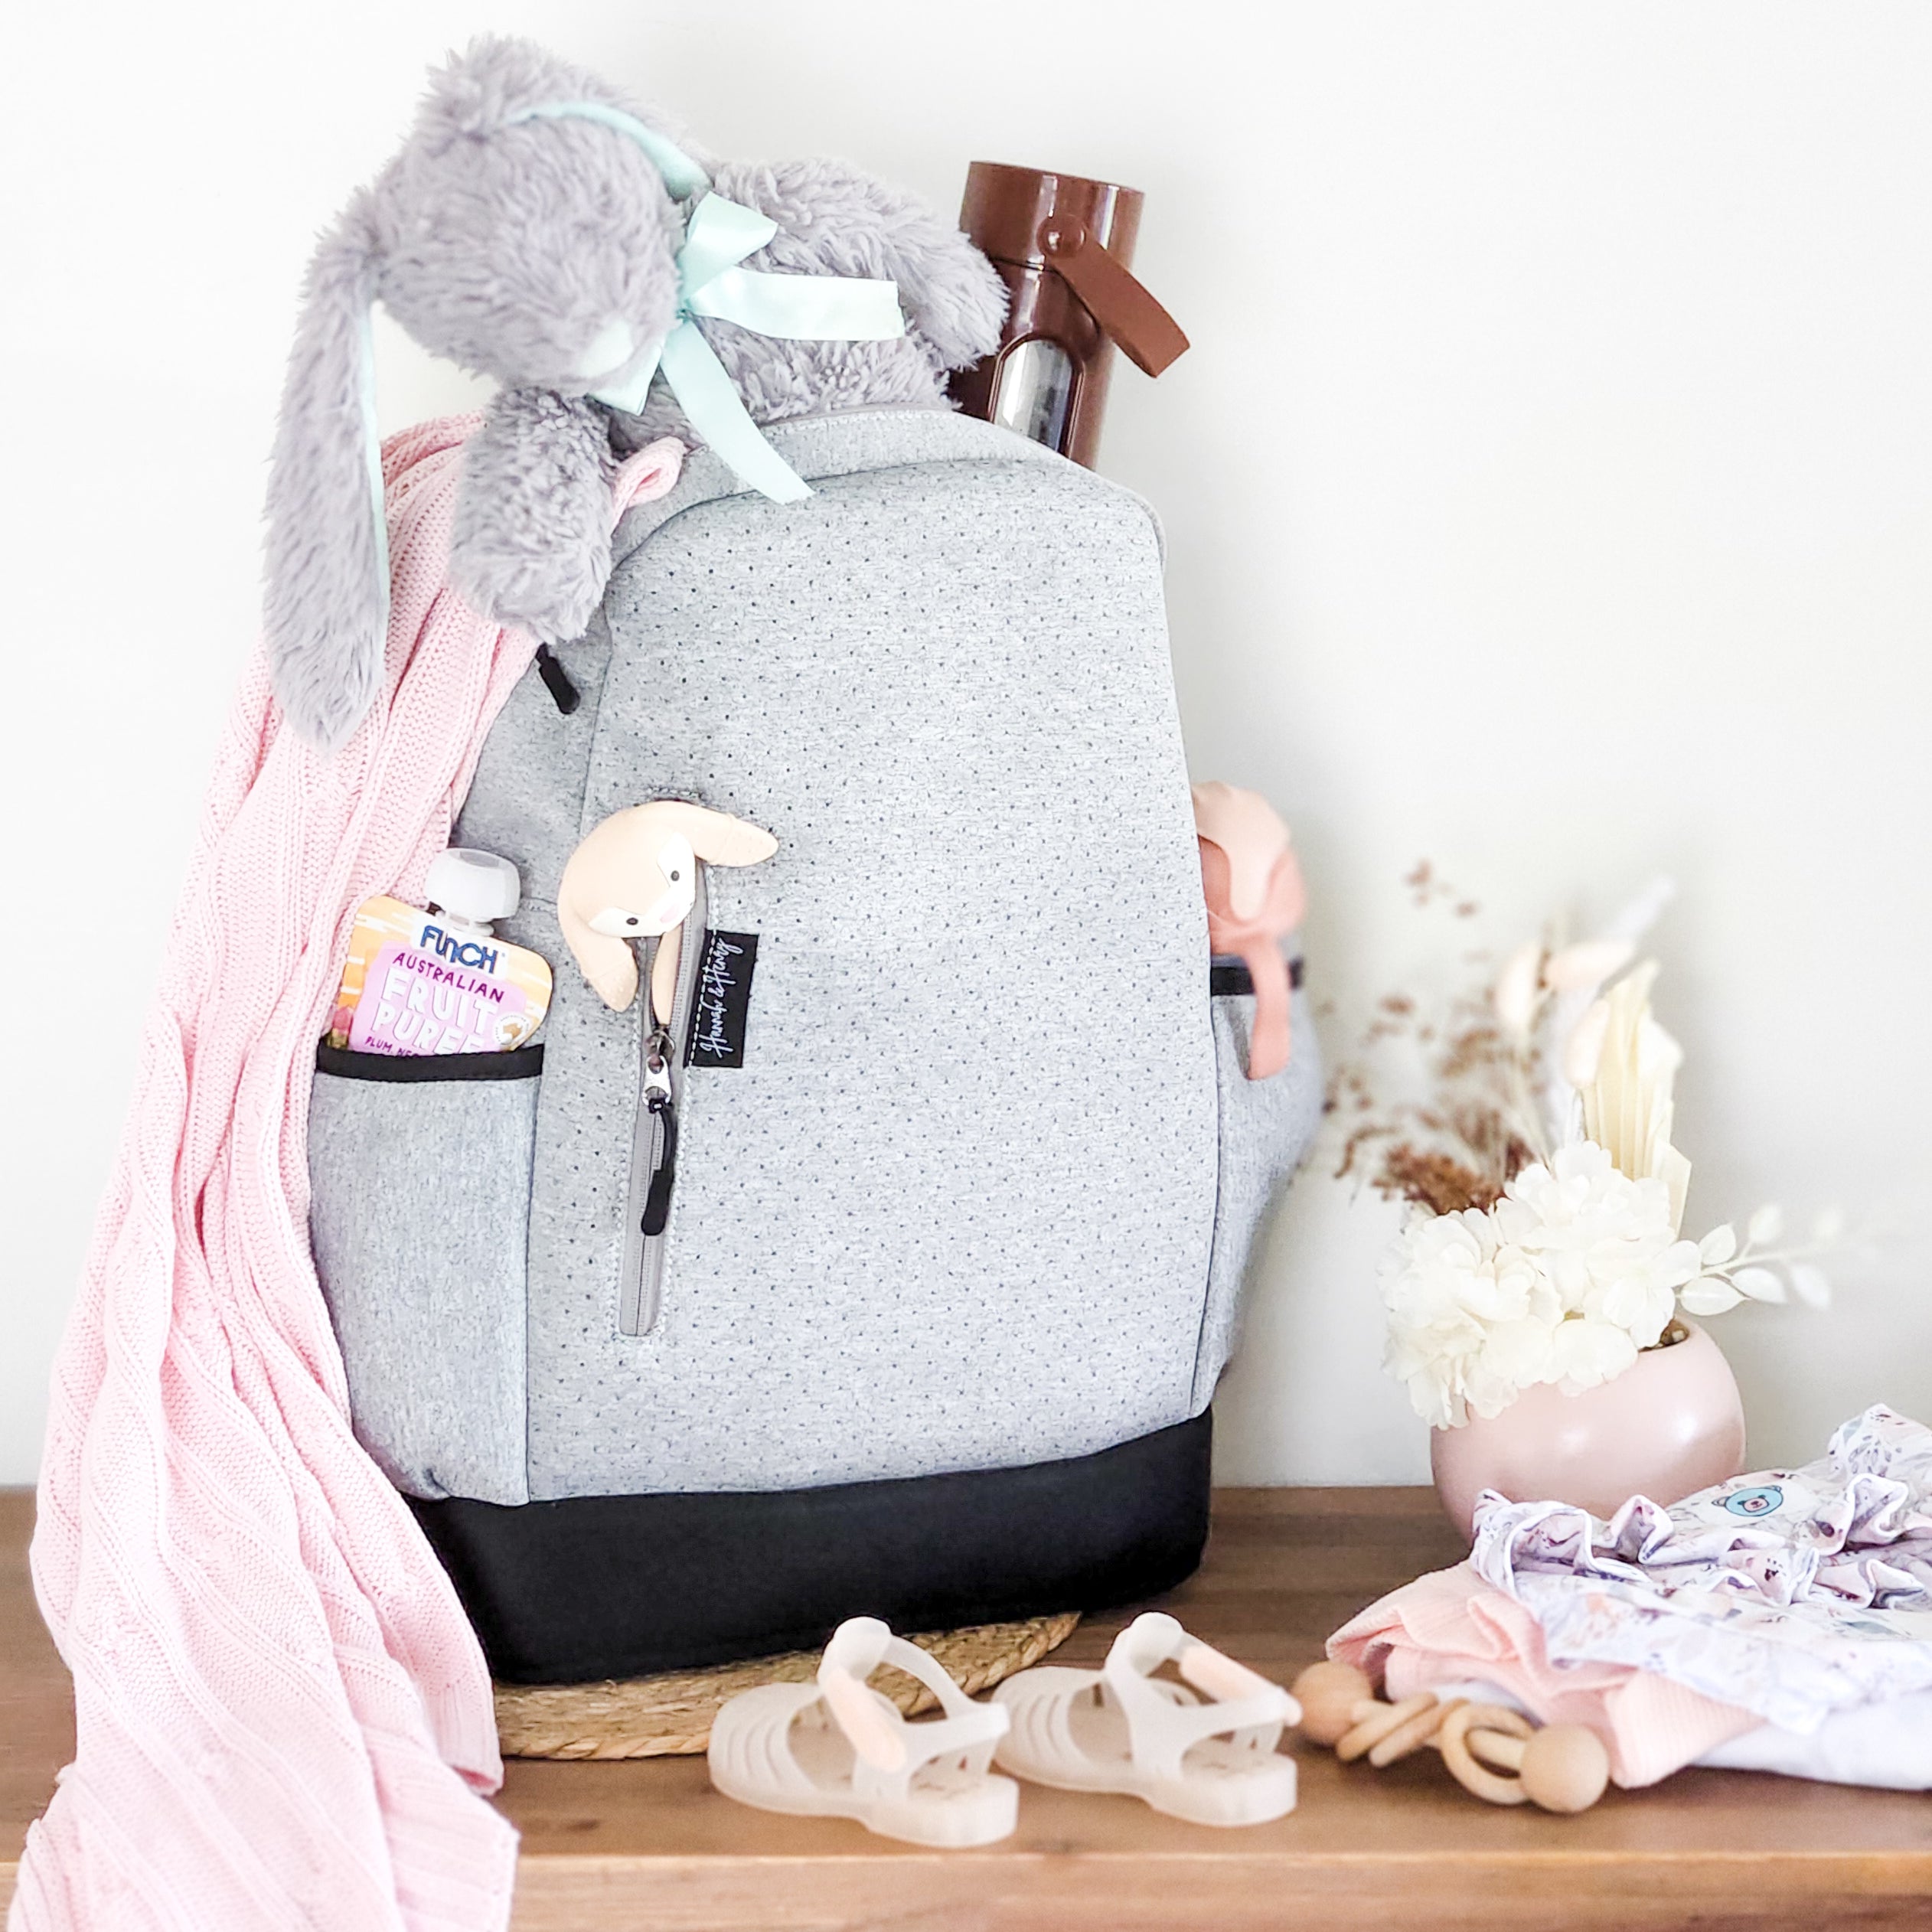 How To Survive A Long Haul Flight With A Baby And A Toddler